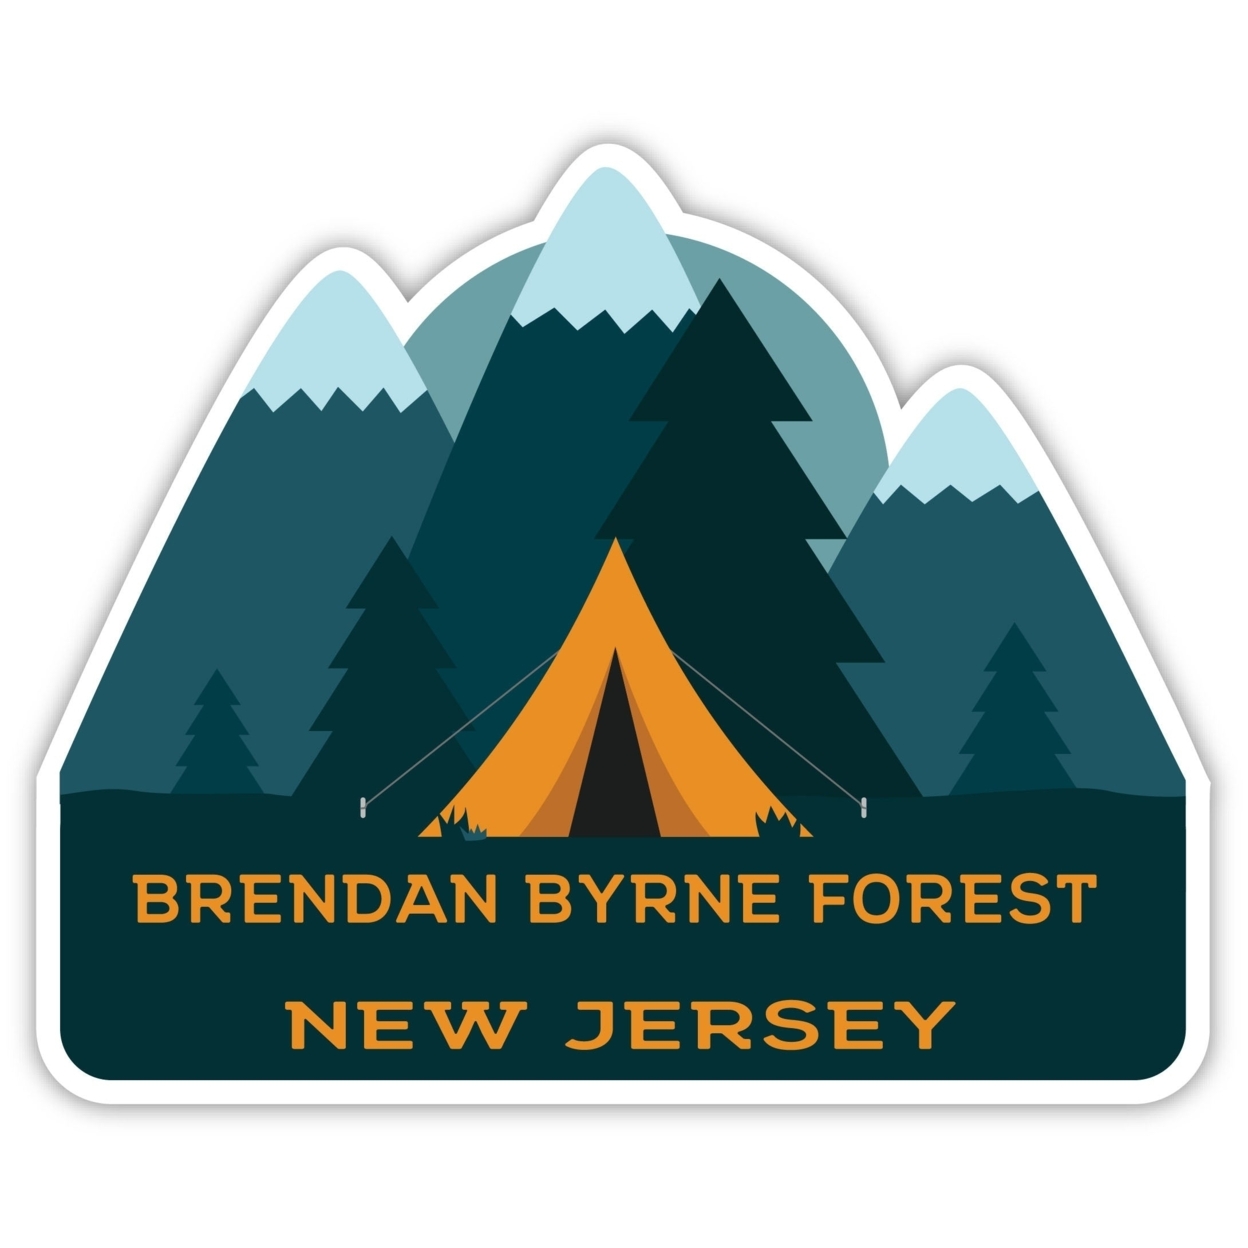 Brendan Byrne Forest New Jersey Souvenir Decorative Stickers (Choose Theme And Size) - Single Unit, 8-Inch, Tent